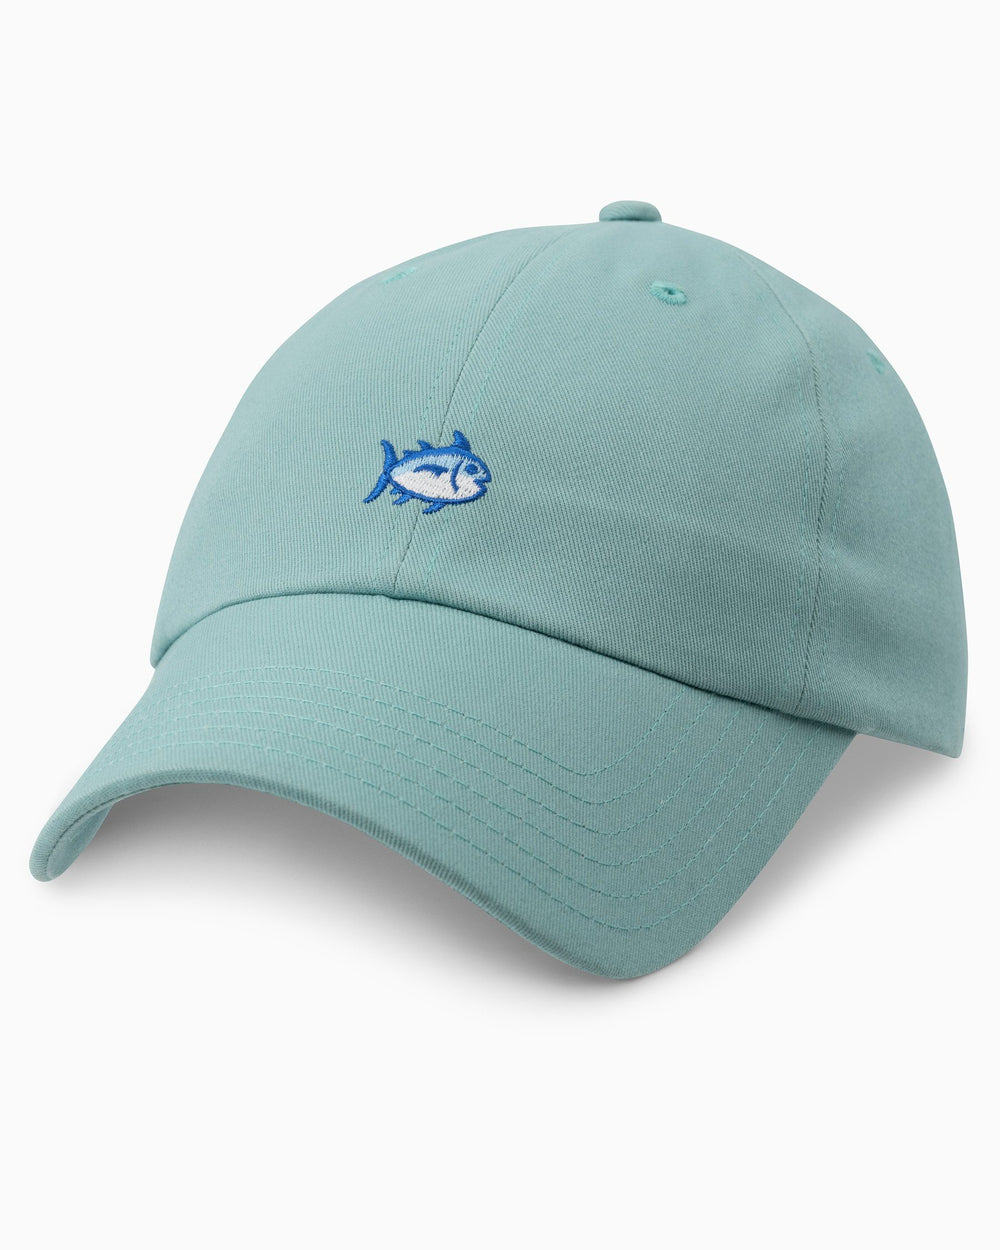 The front of the Skipjack Hat by Southern Tide - Wake Blue